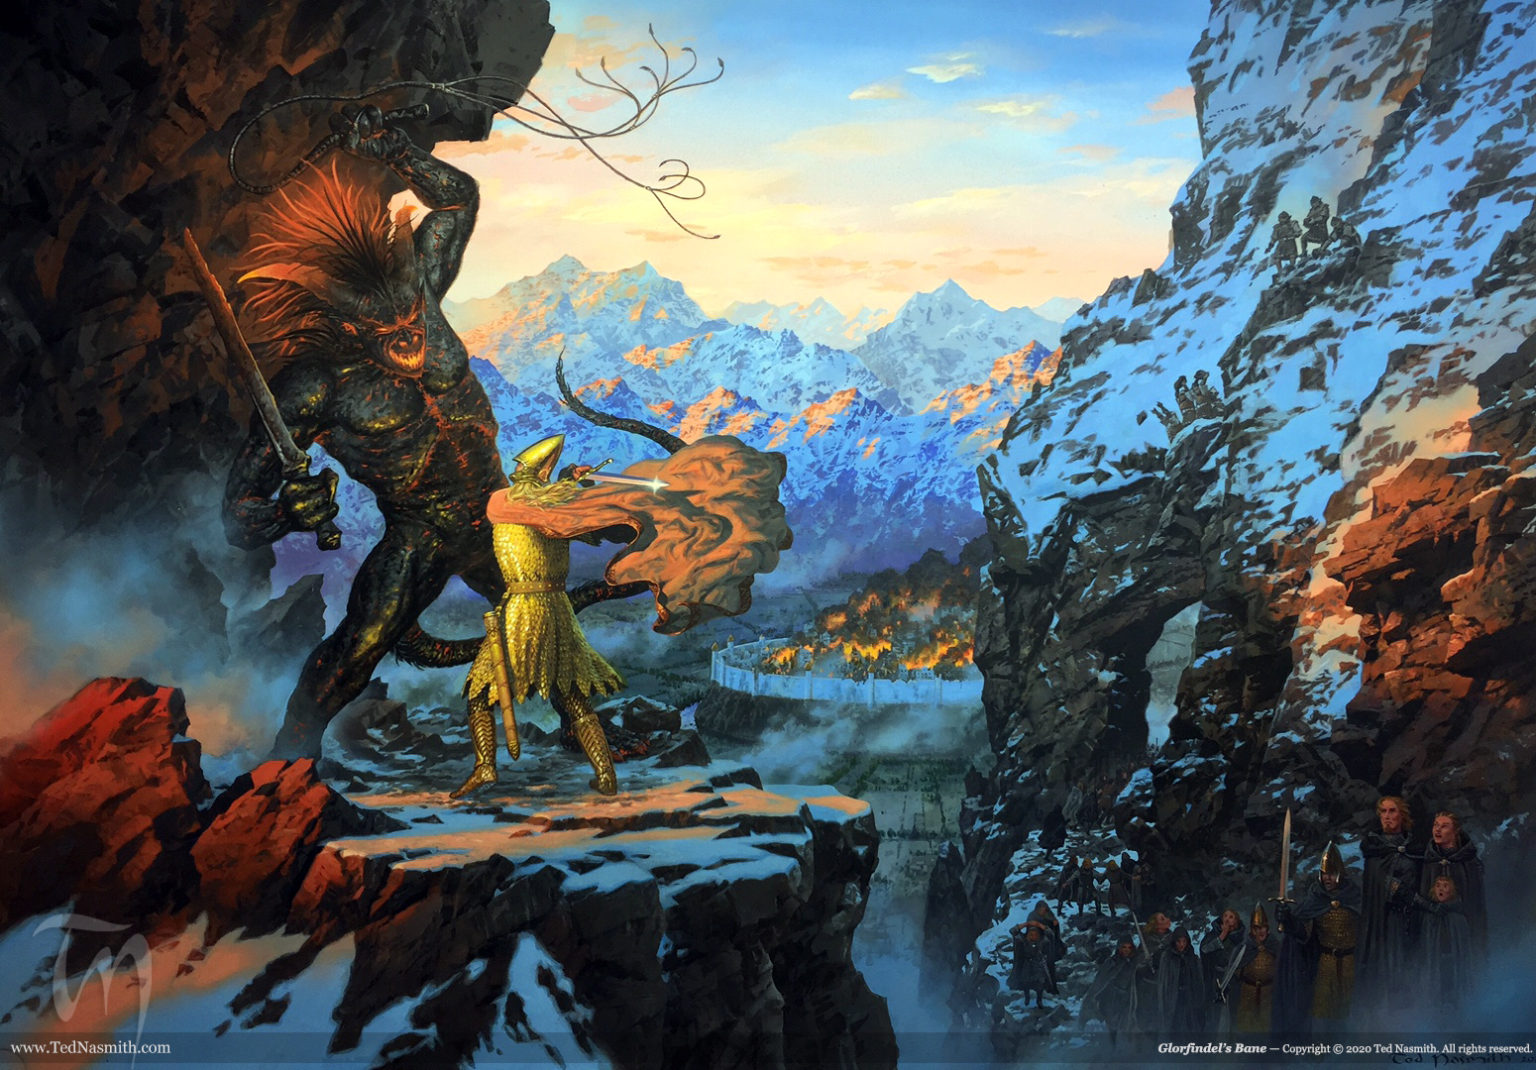 Also, some new artwork from Ted Nasmith two of which (Moria Gate and Glorfi...